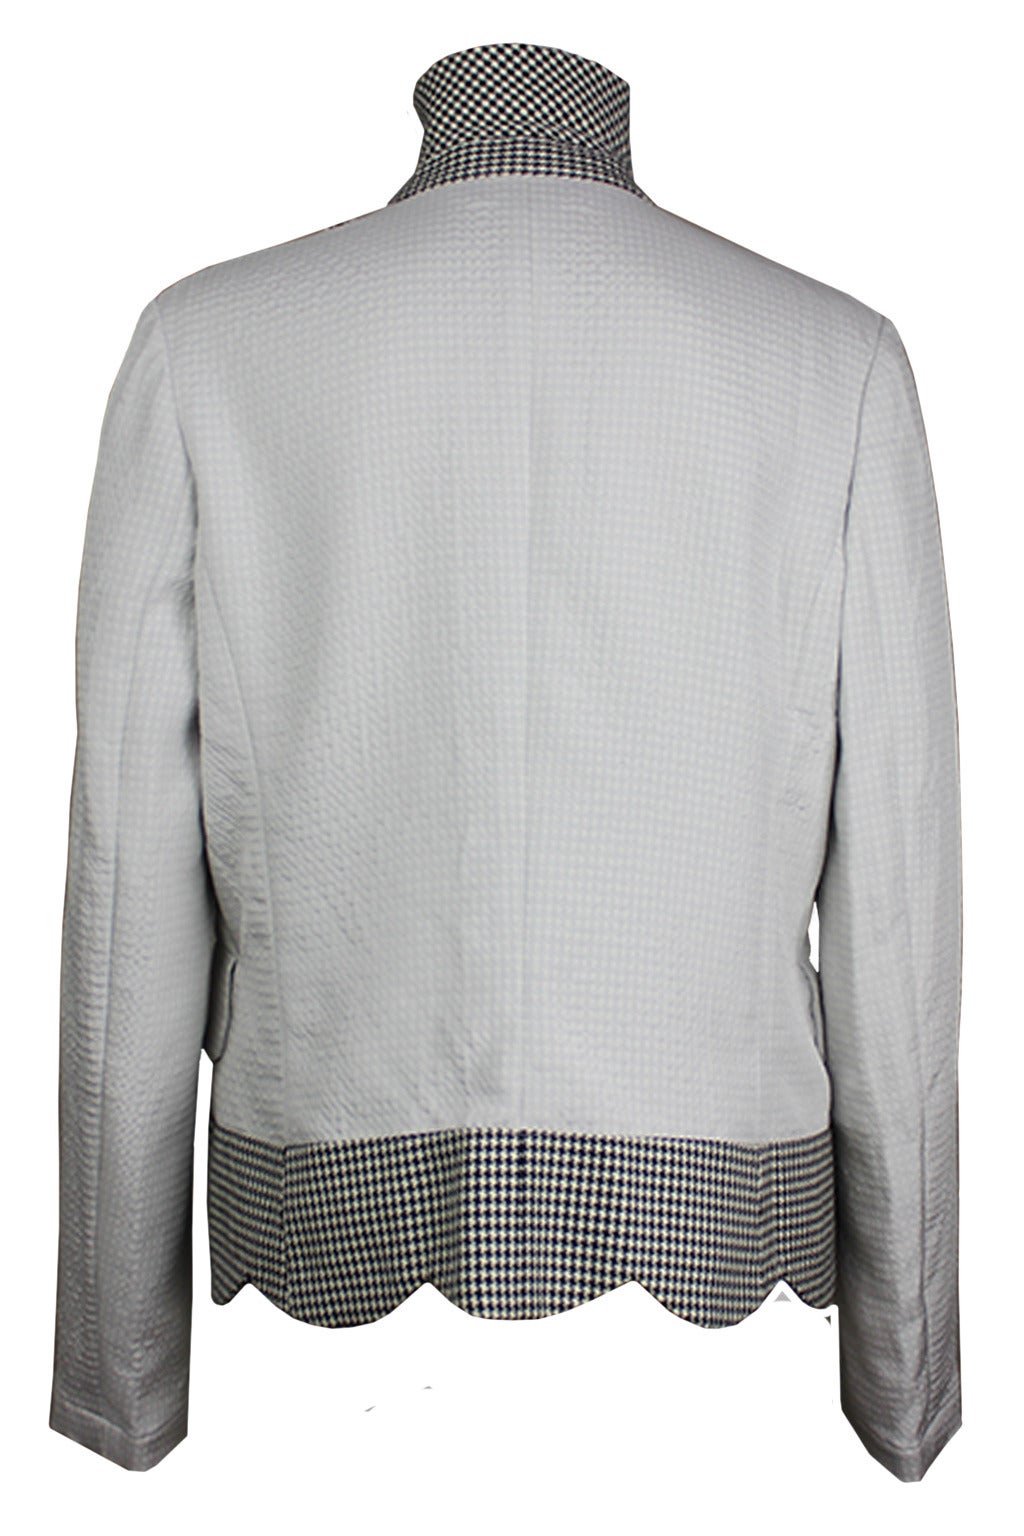 Gray Comme des Garcons Scallop Edged Houndstooth Jacket